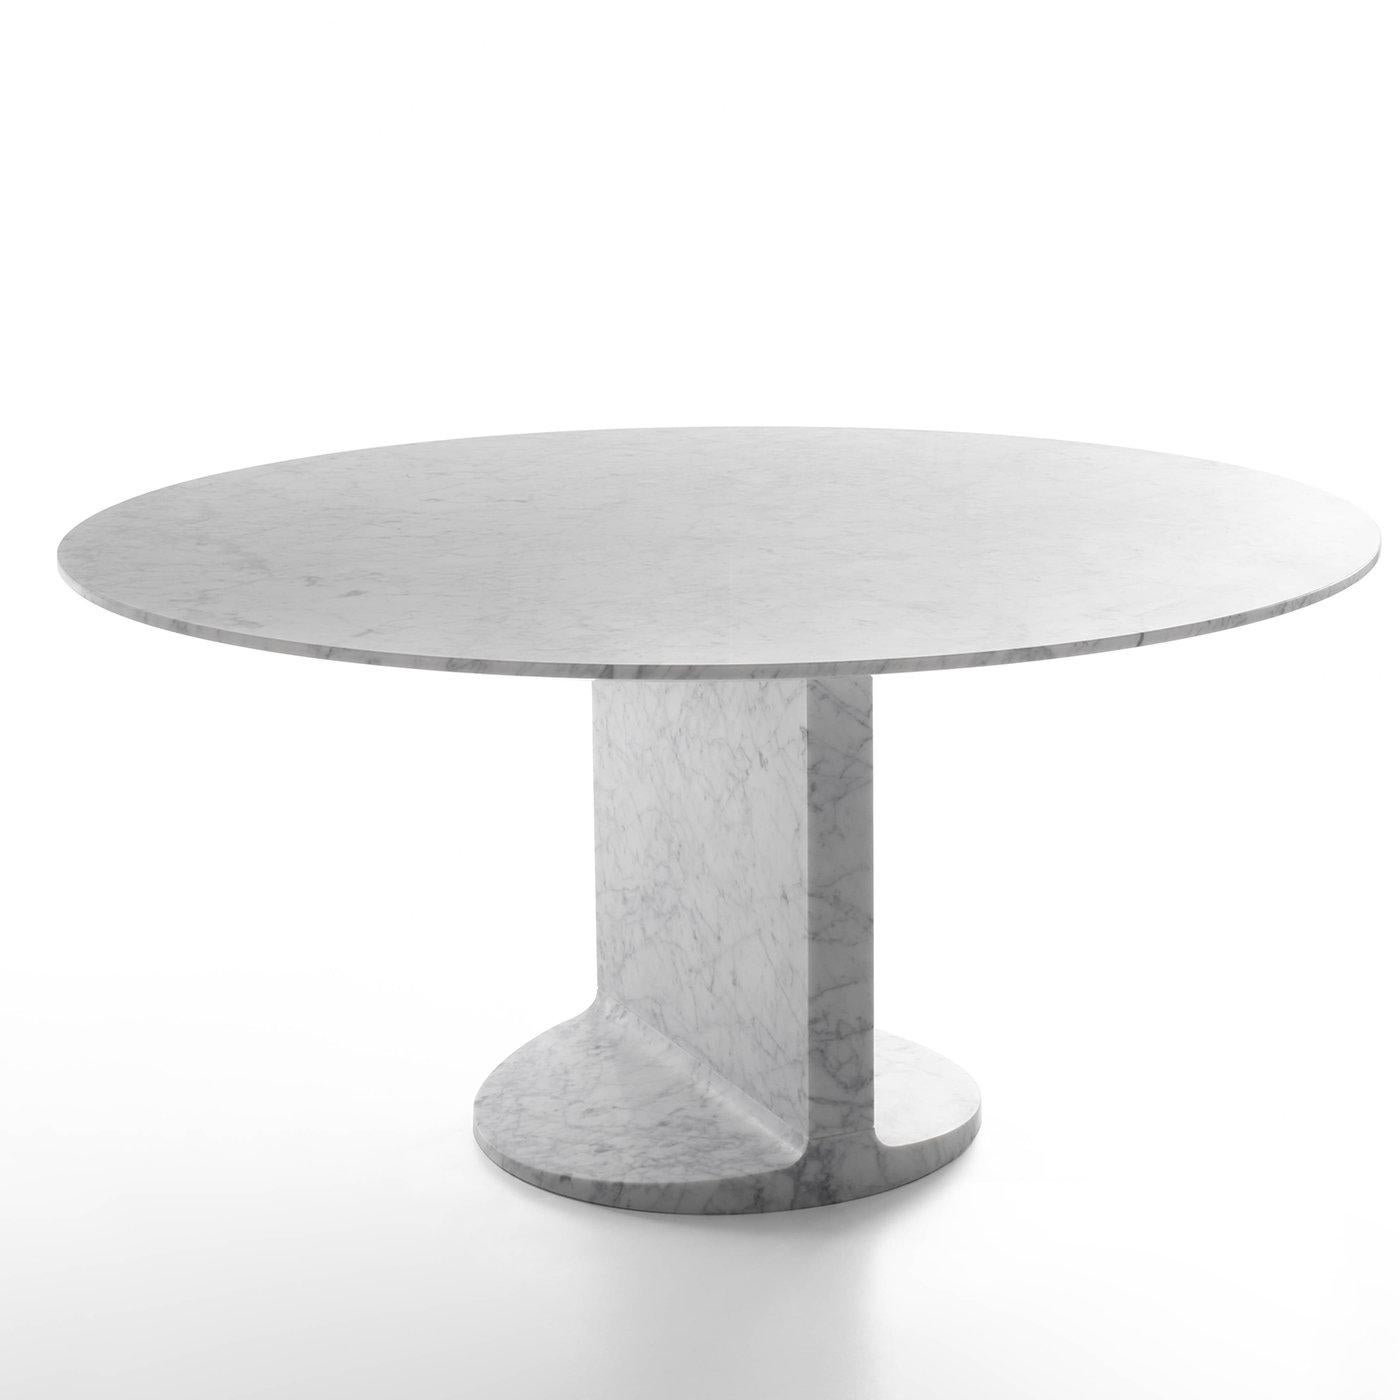 Dining table, round, in white Carrara marble, matt polished finish.